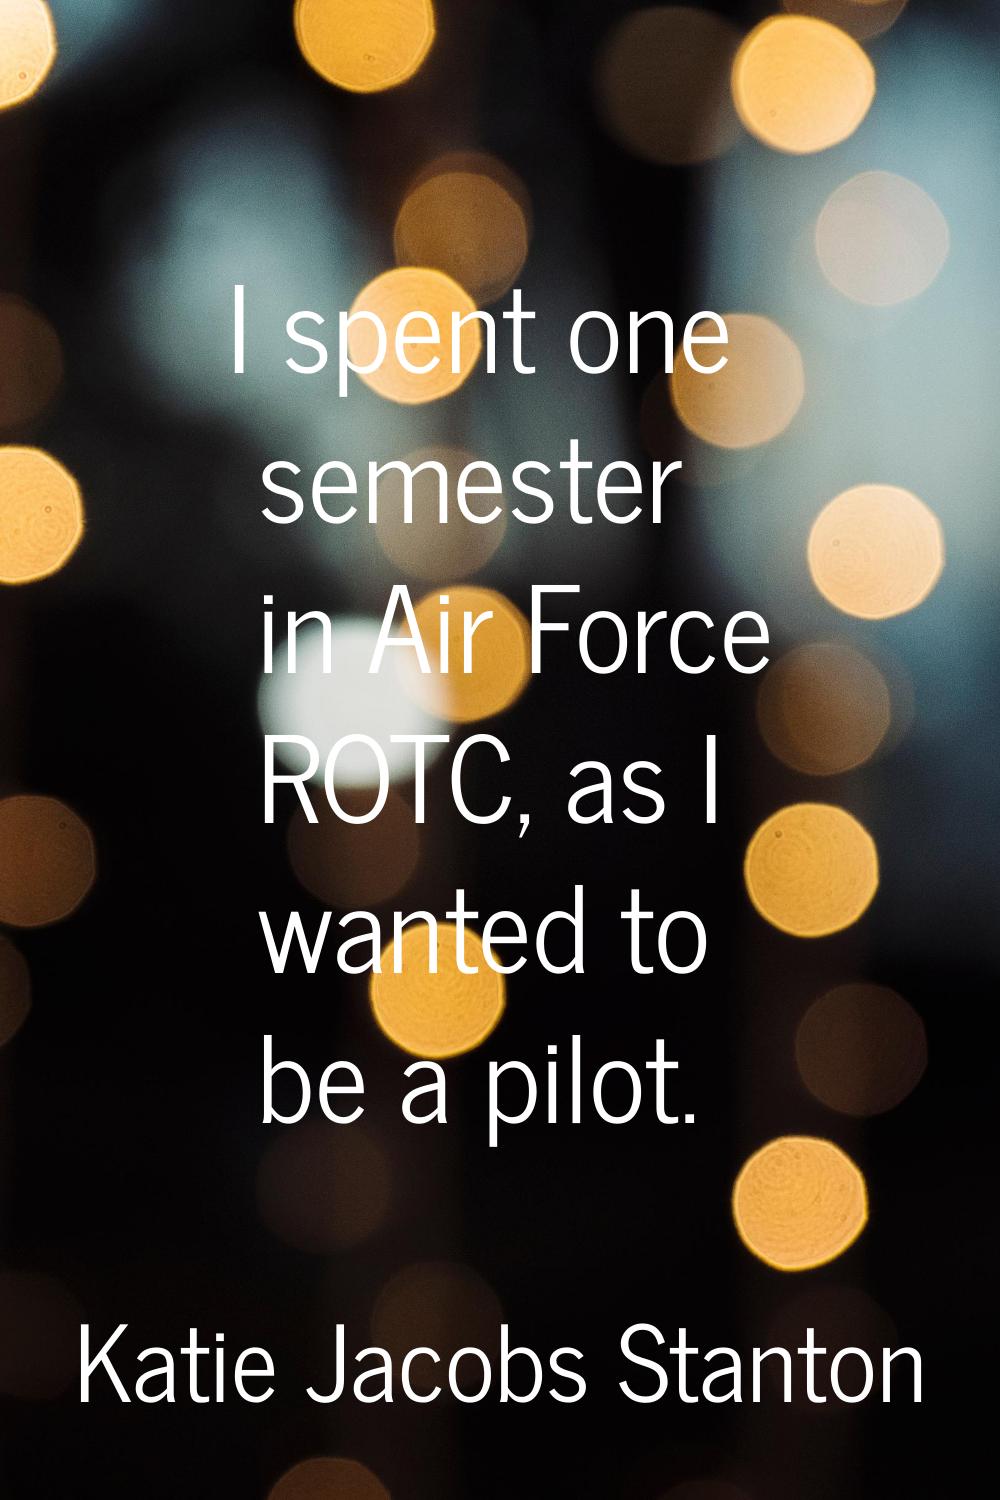 I spent one semester in Air Force ROTC, as I wanted to be a pilot.